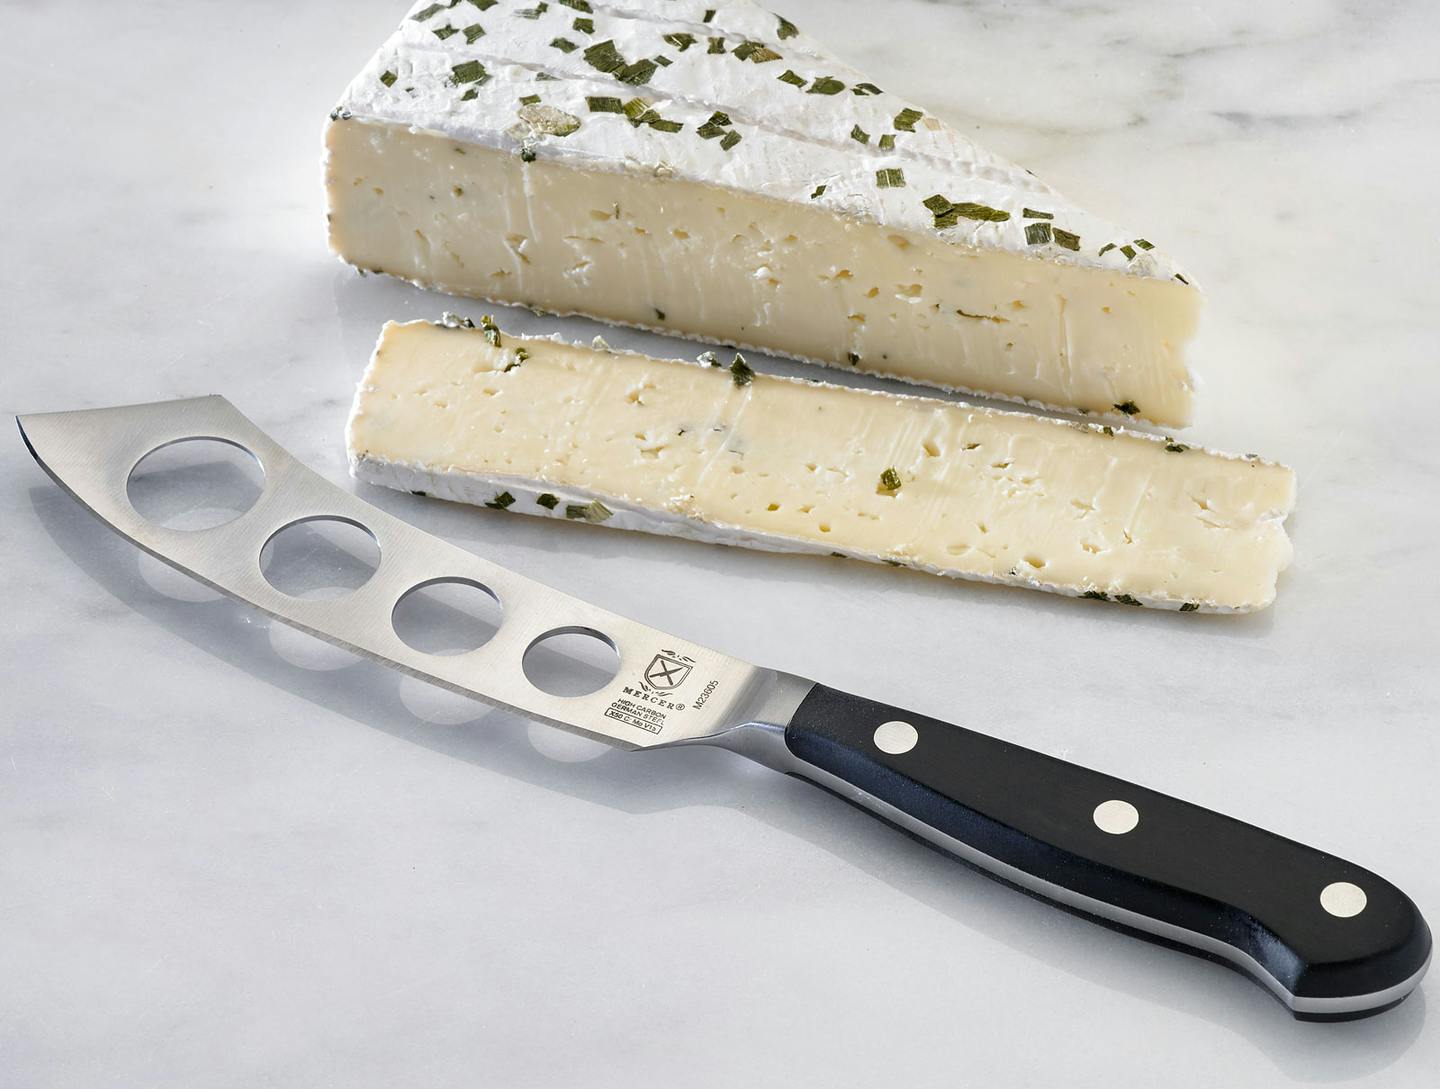 Wusthof Classic Soft Cheese Knife, 5-in